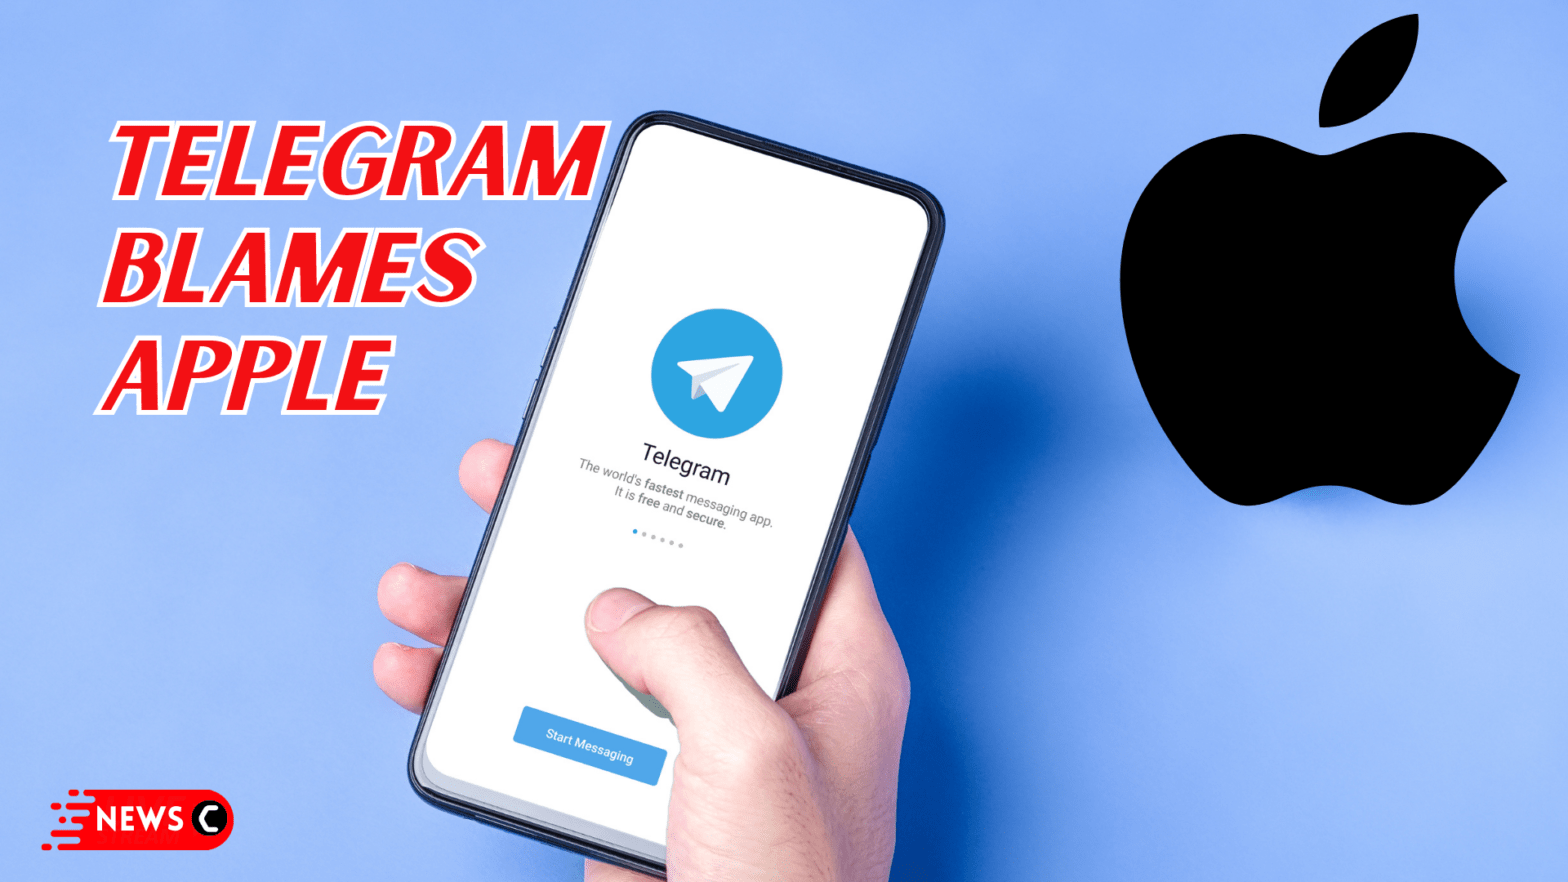 Telegram Major iOS Update Being Held By App Store - CEO Pavel Durov Gets Angry